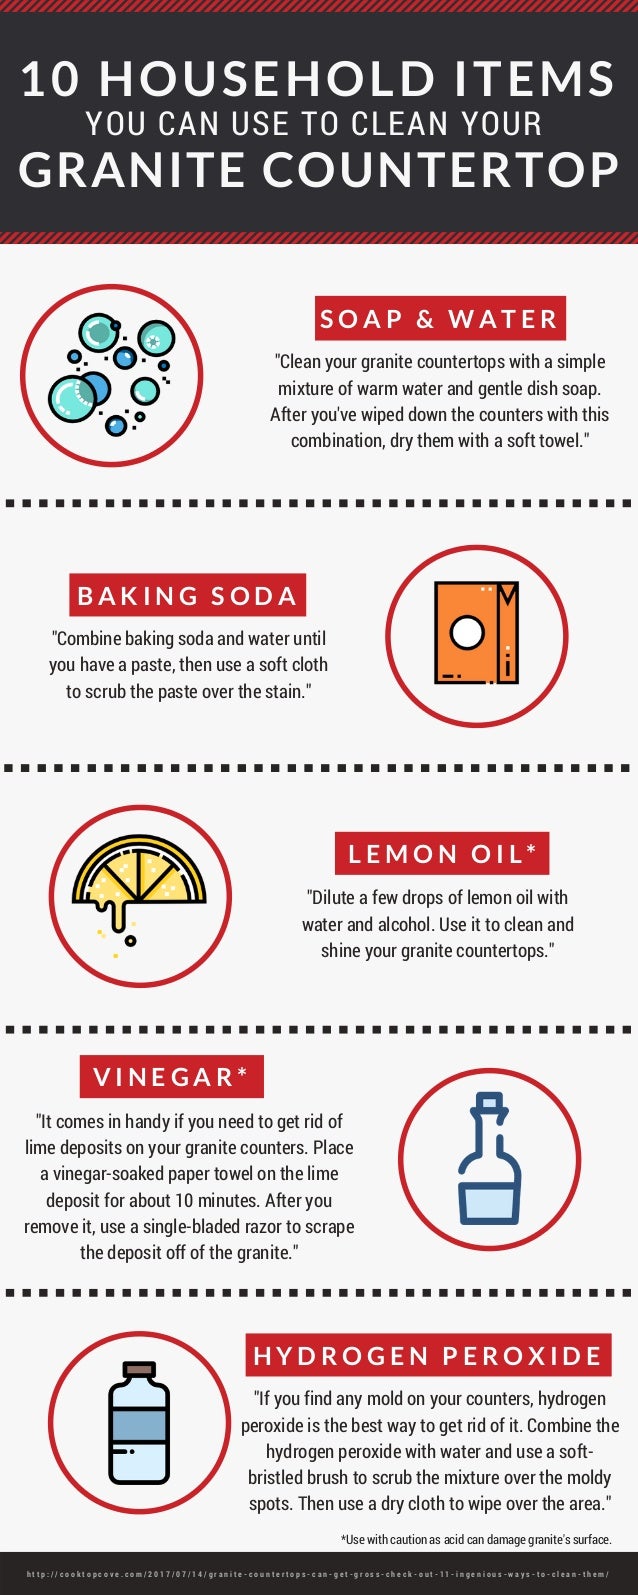 10 Household Items You Can Use To Clean Your Granite Countertop